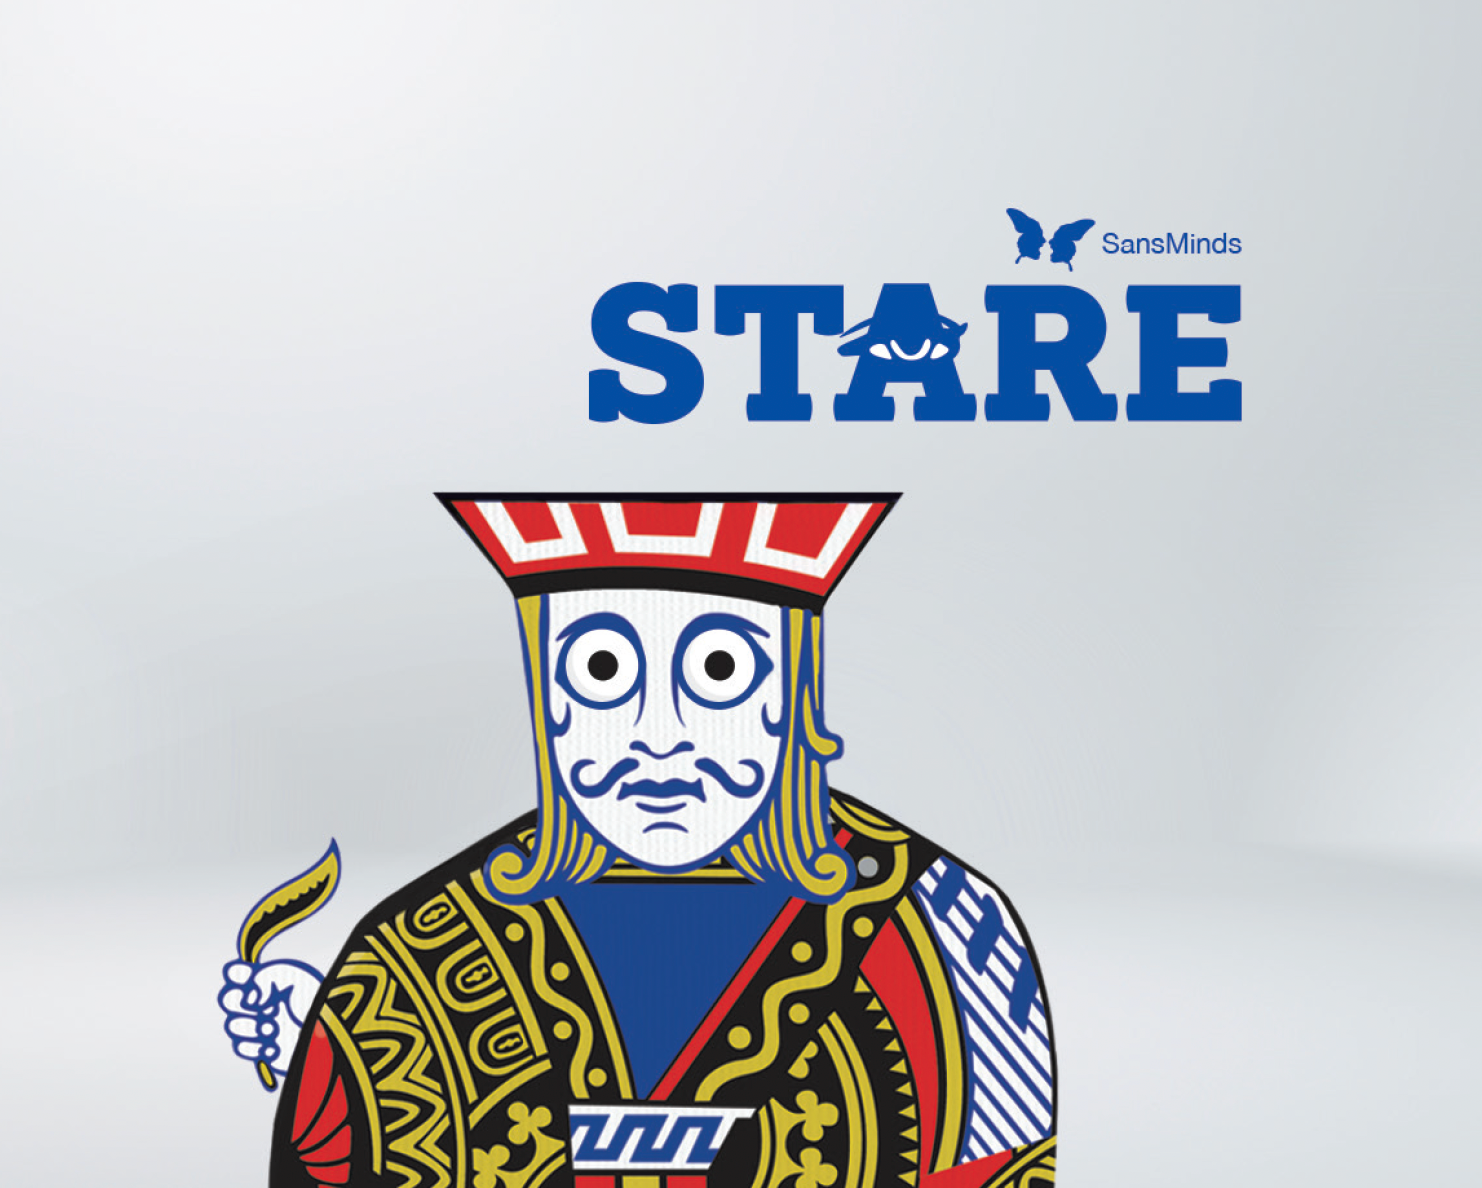 Stare - SansMinds Creative Lab - The Online Magic Store